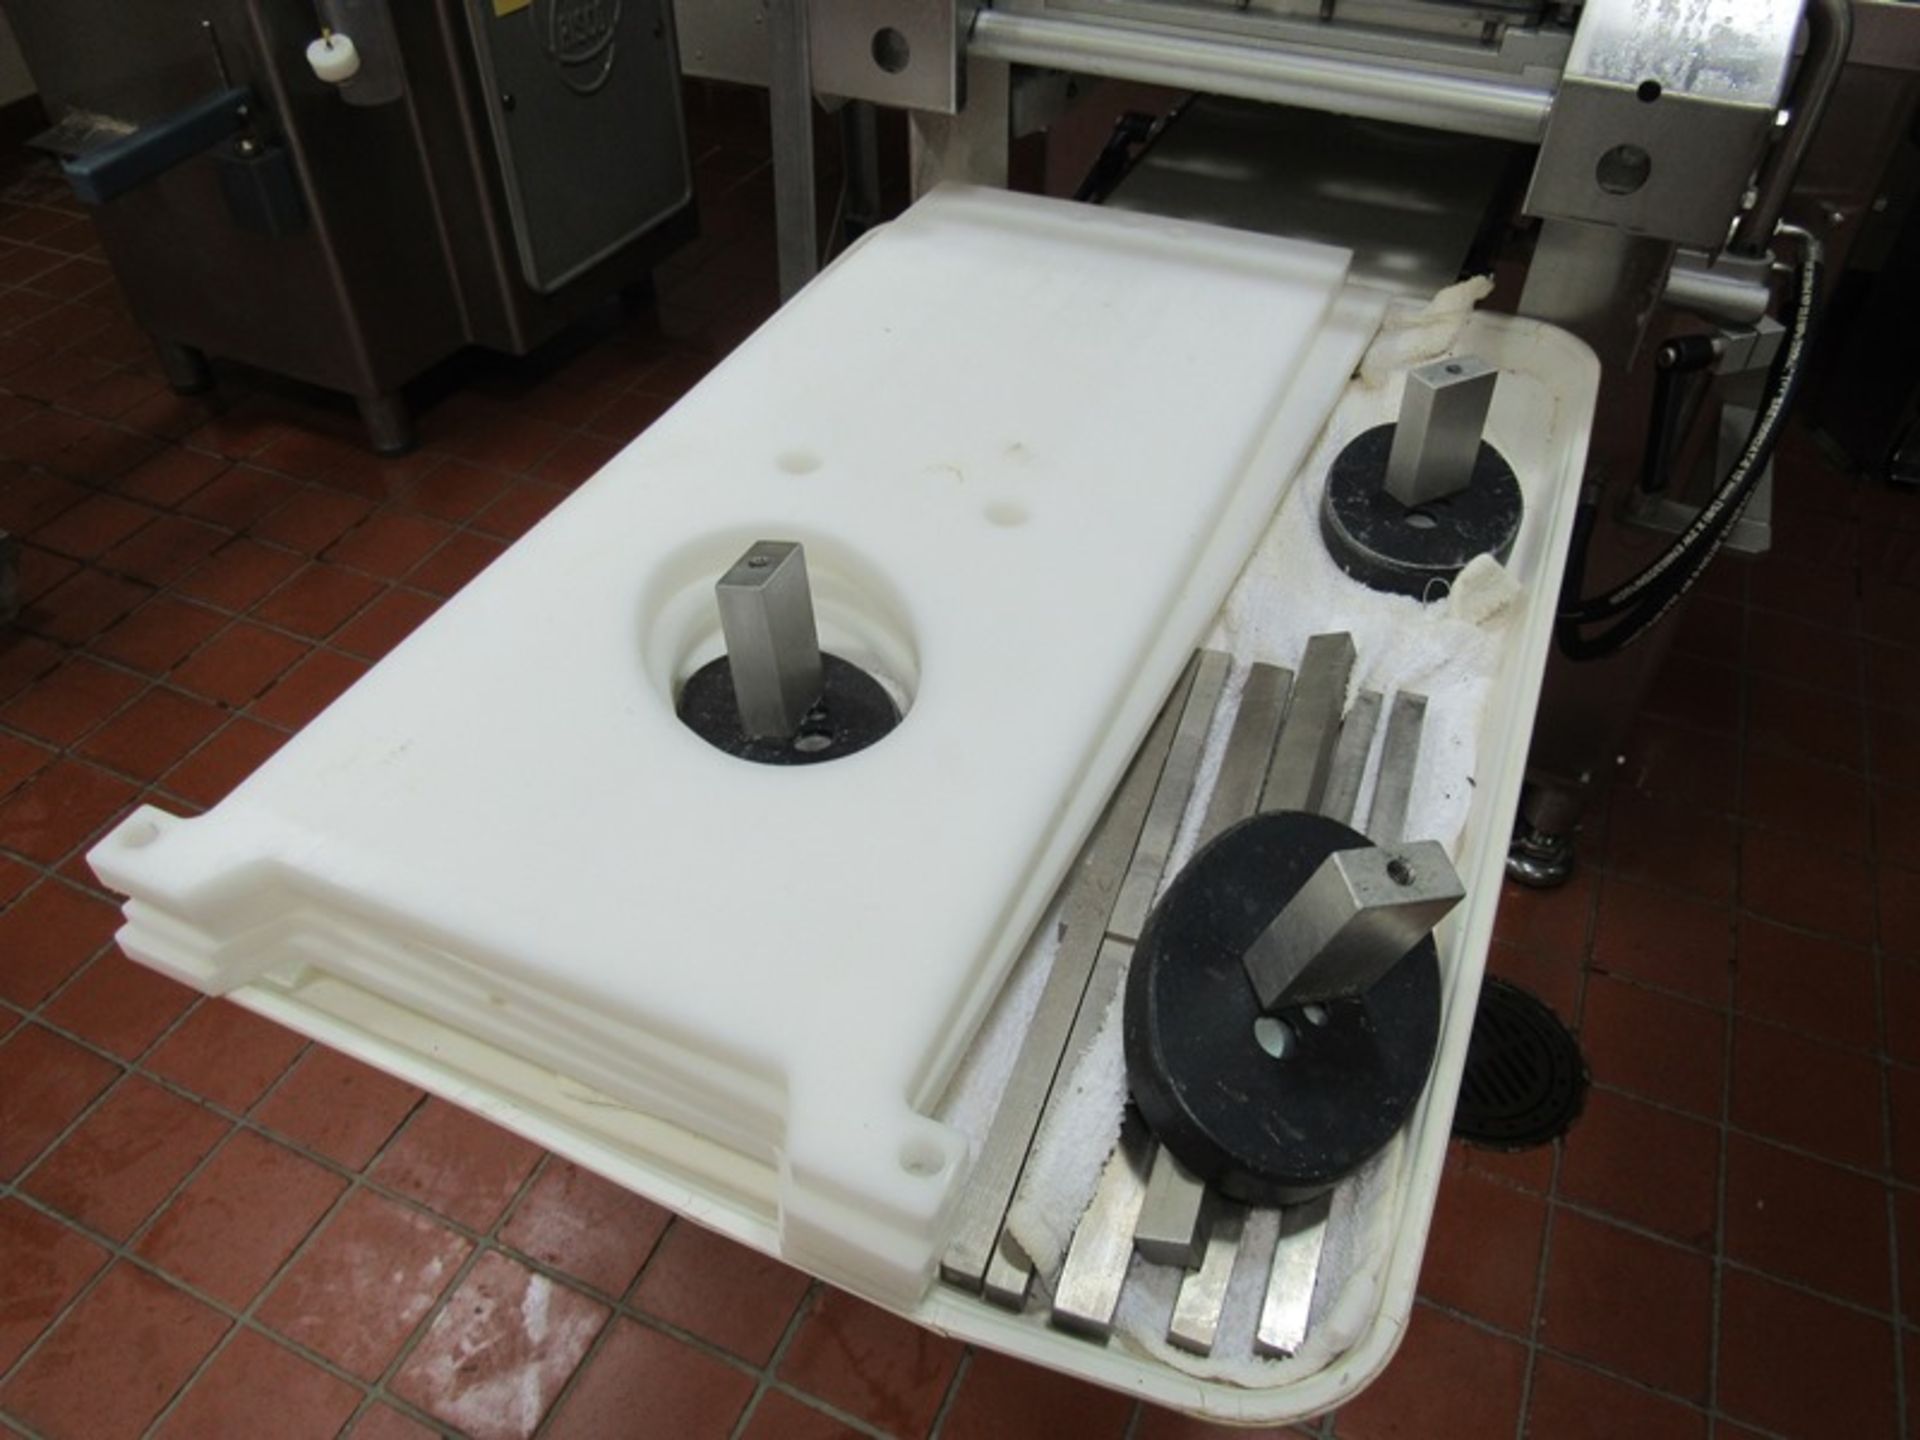 Nutec Mdl. 720 Patty Former, with ultimate fill system, set up with 2 up, 4.5 round, 4 oz plate with - Image 14 of 16